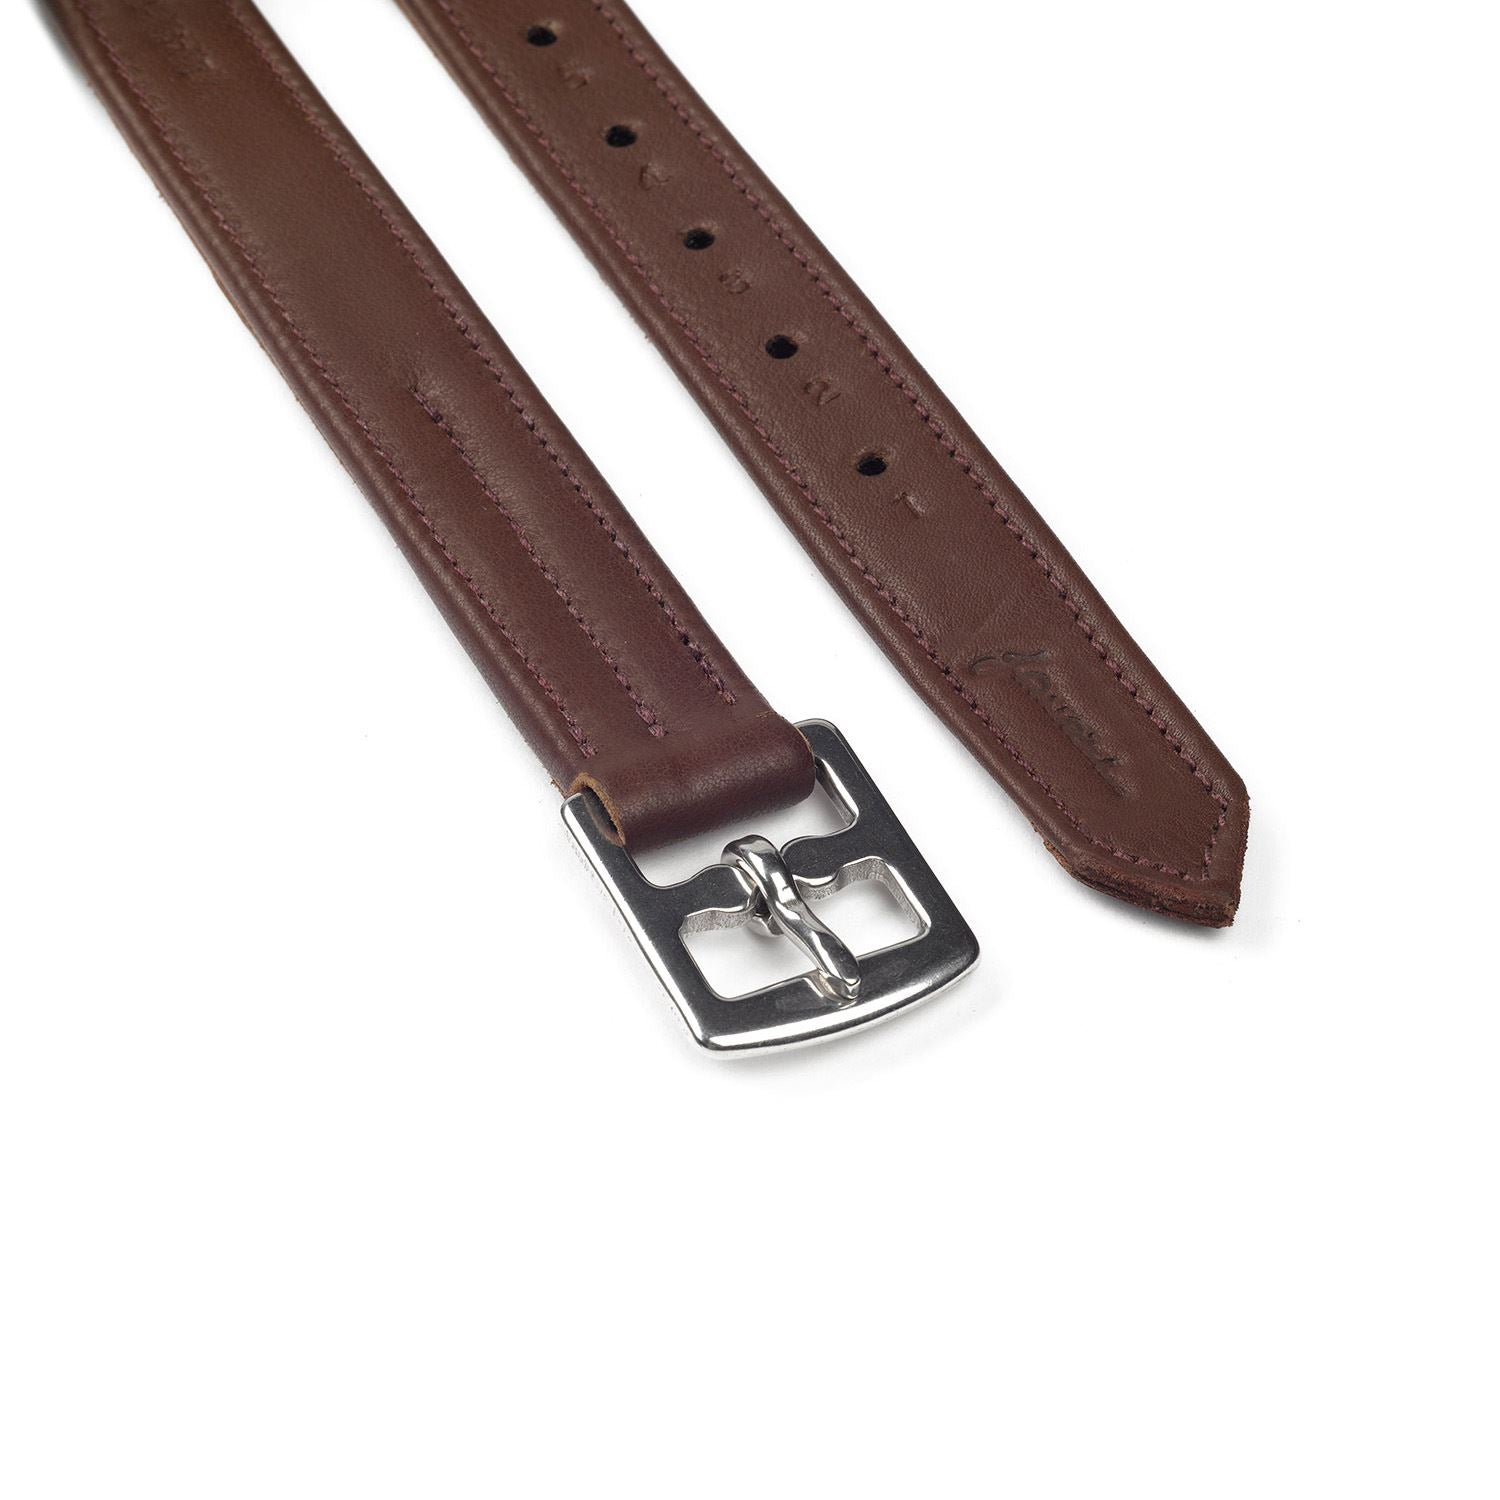 Whitaker Stirrup Leathers - Just Horse Riders